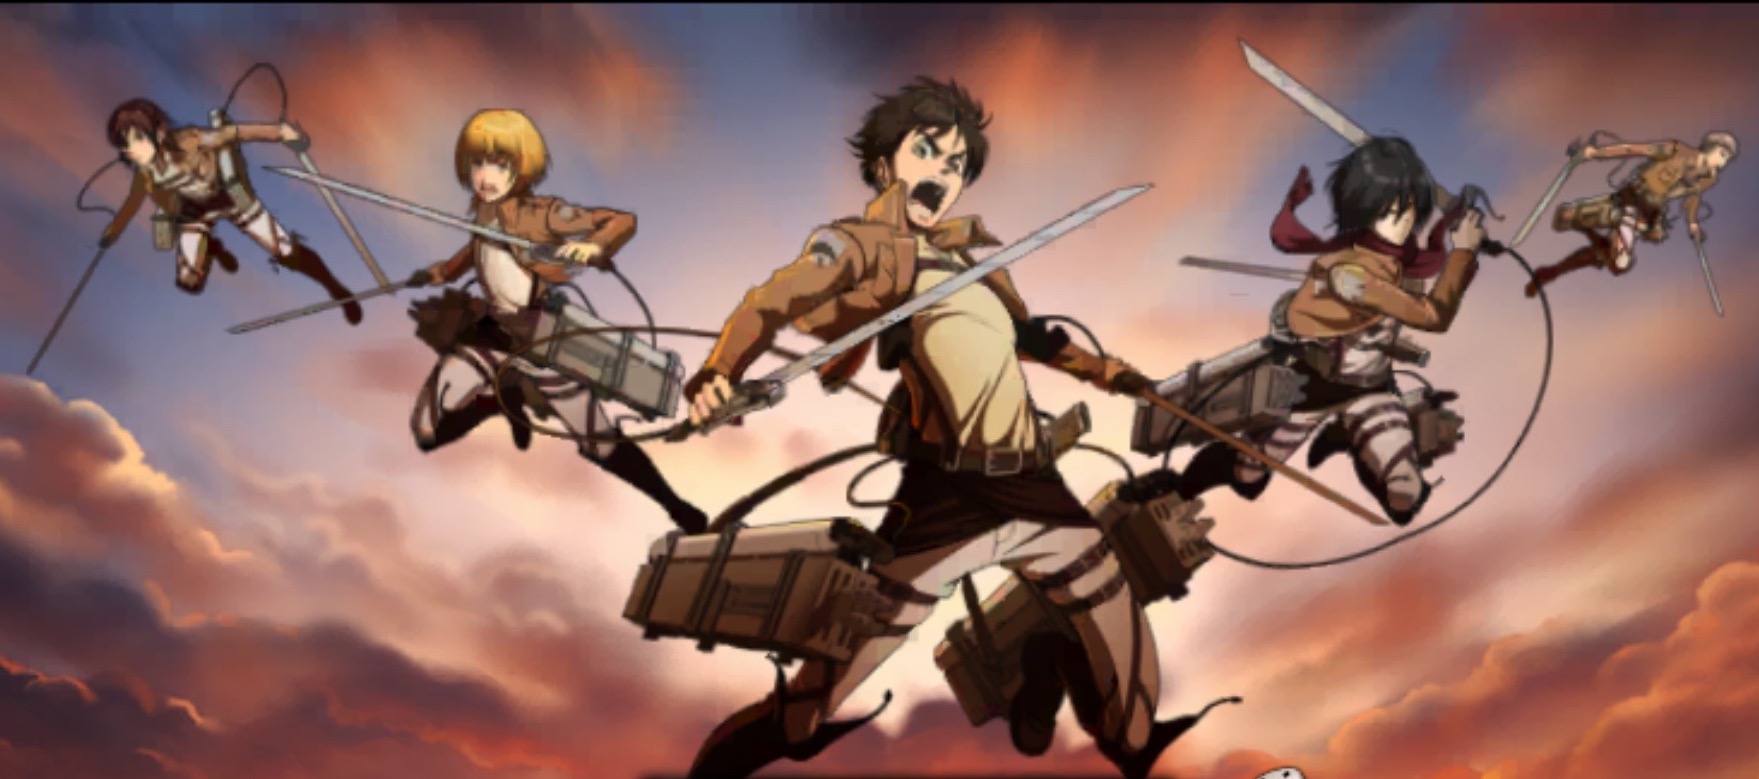 Attack On Titan: Assault Review – A Titanic Misfire